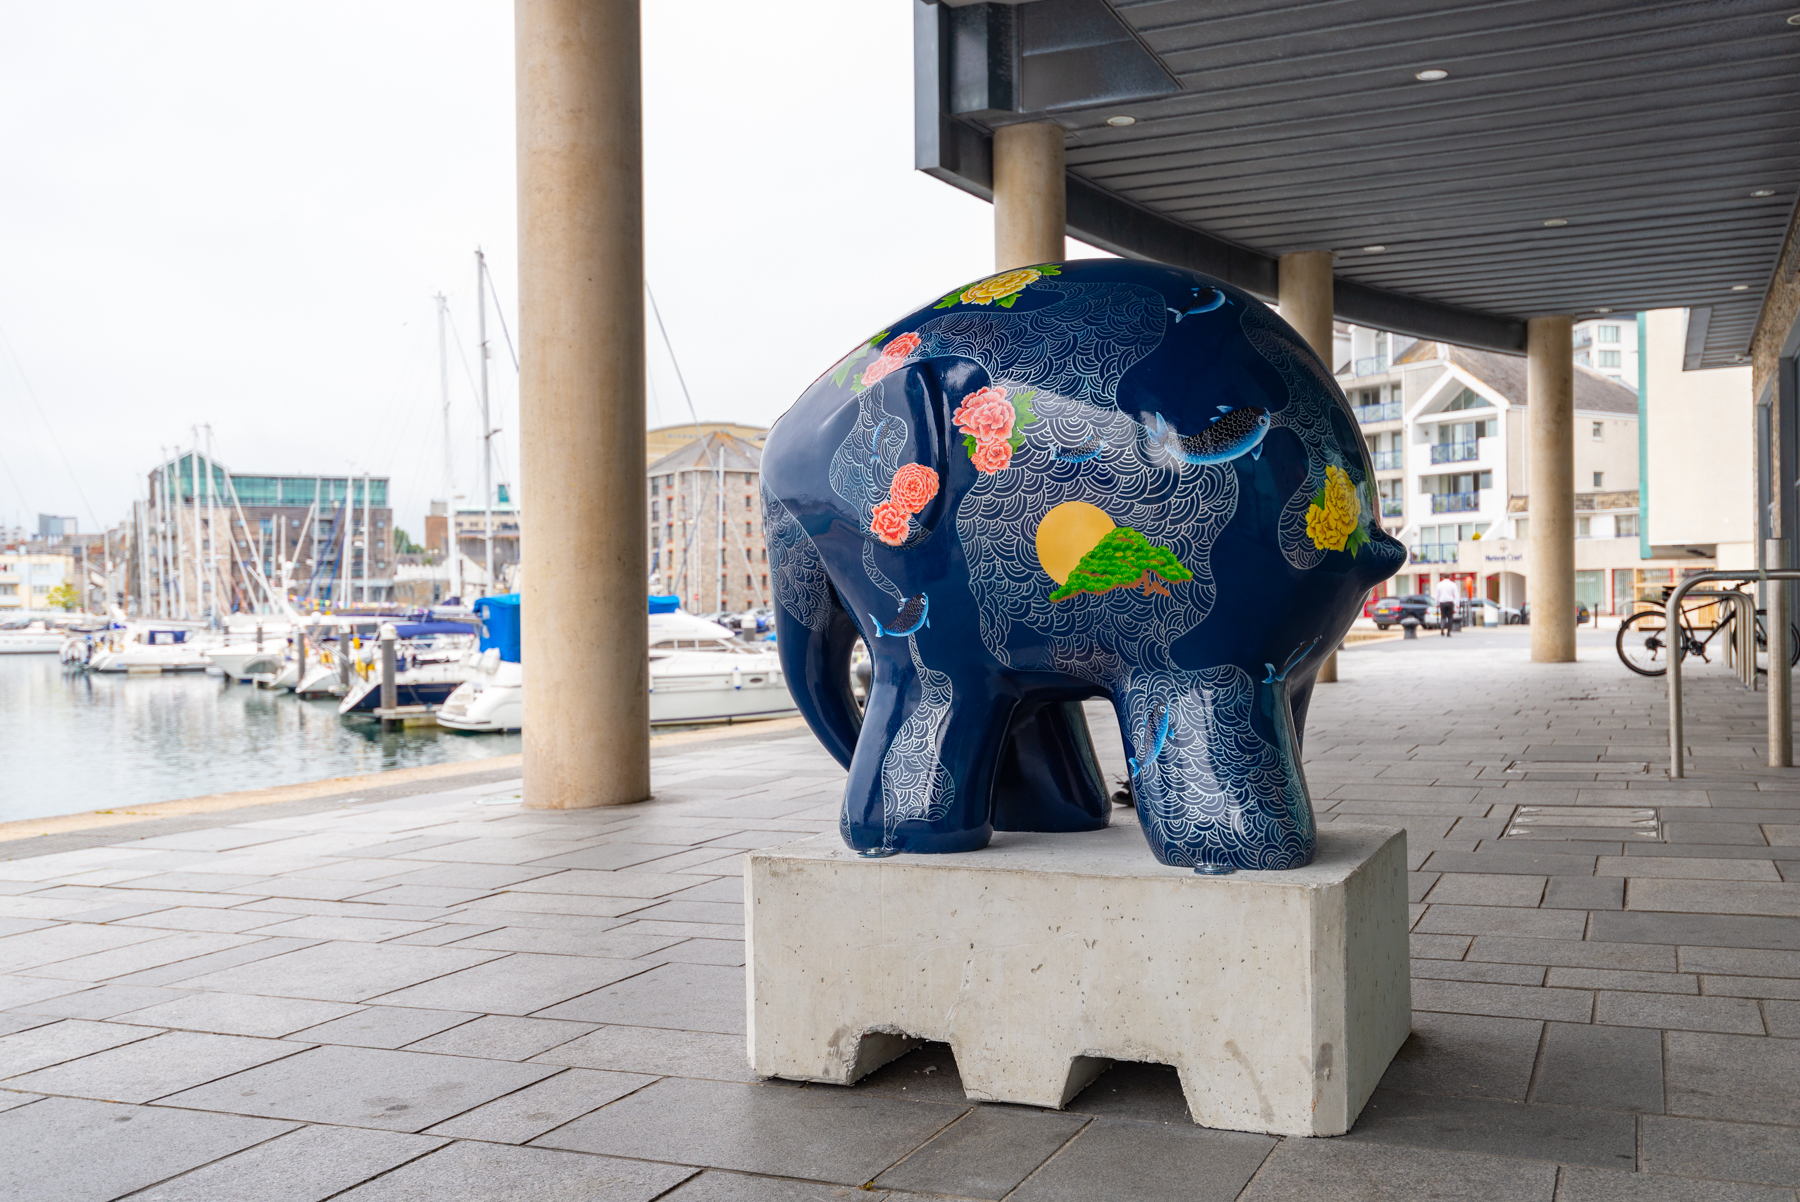 'Zou' by Jess Perrin. Sponsored by Foot Anstey - Image 15 of 16